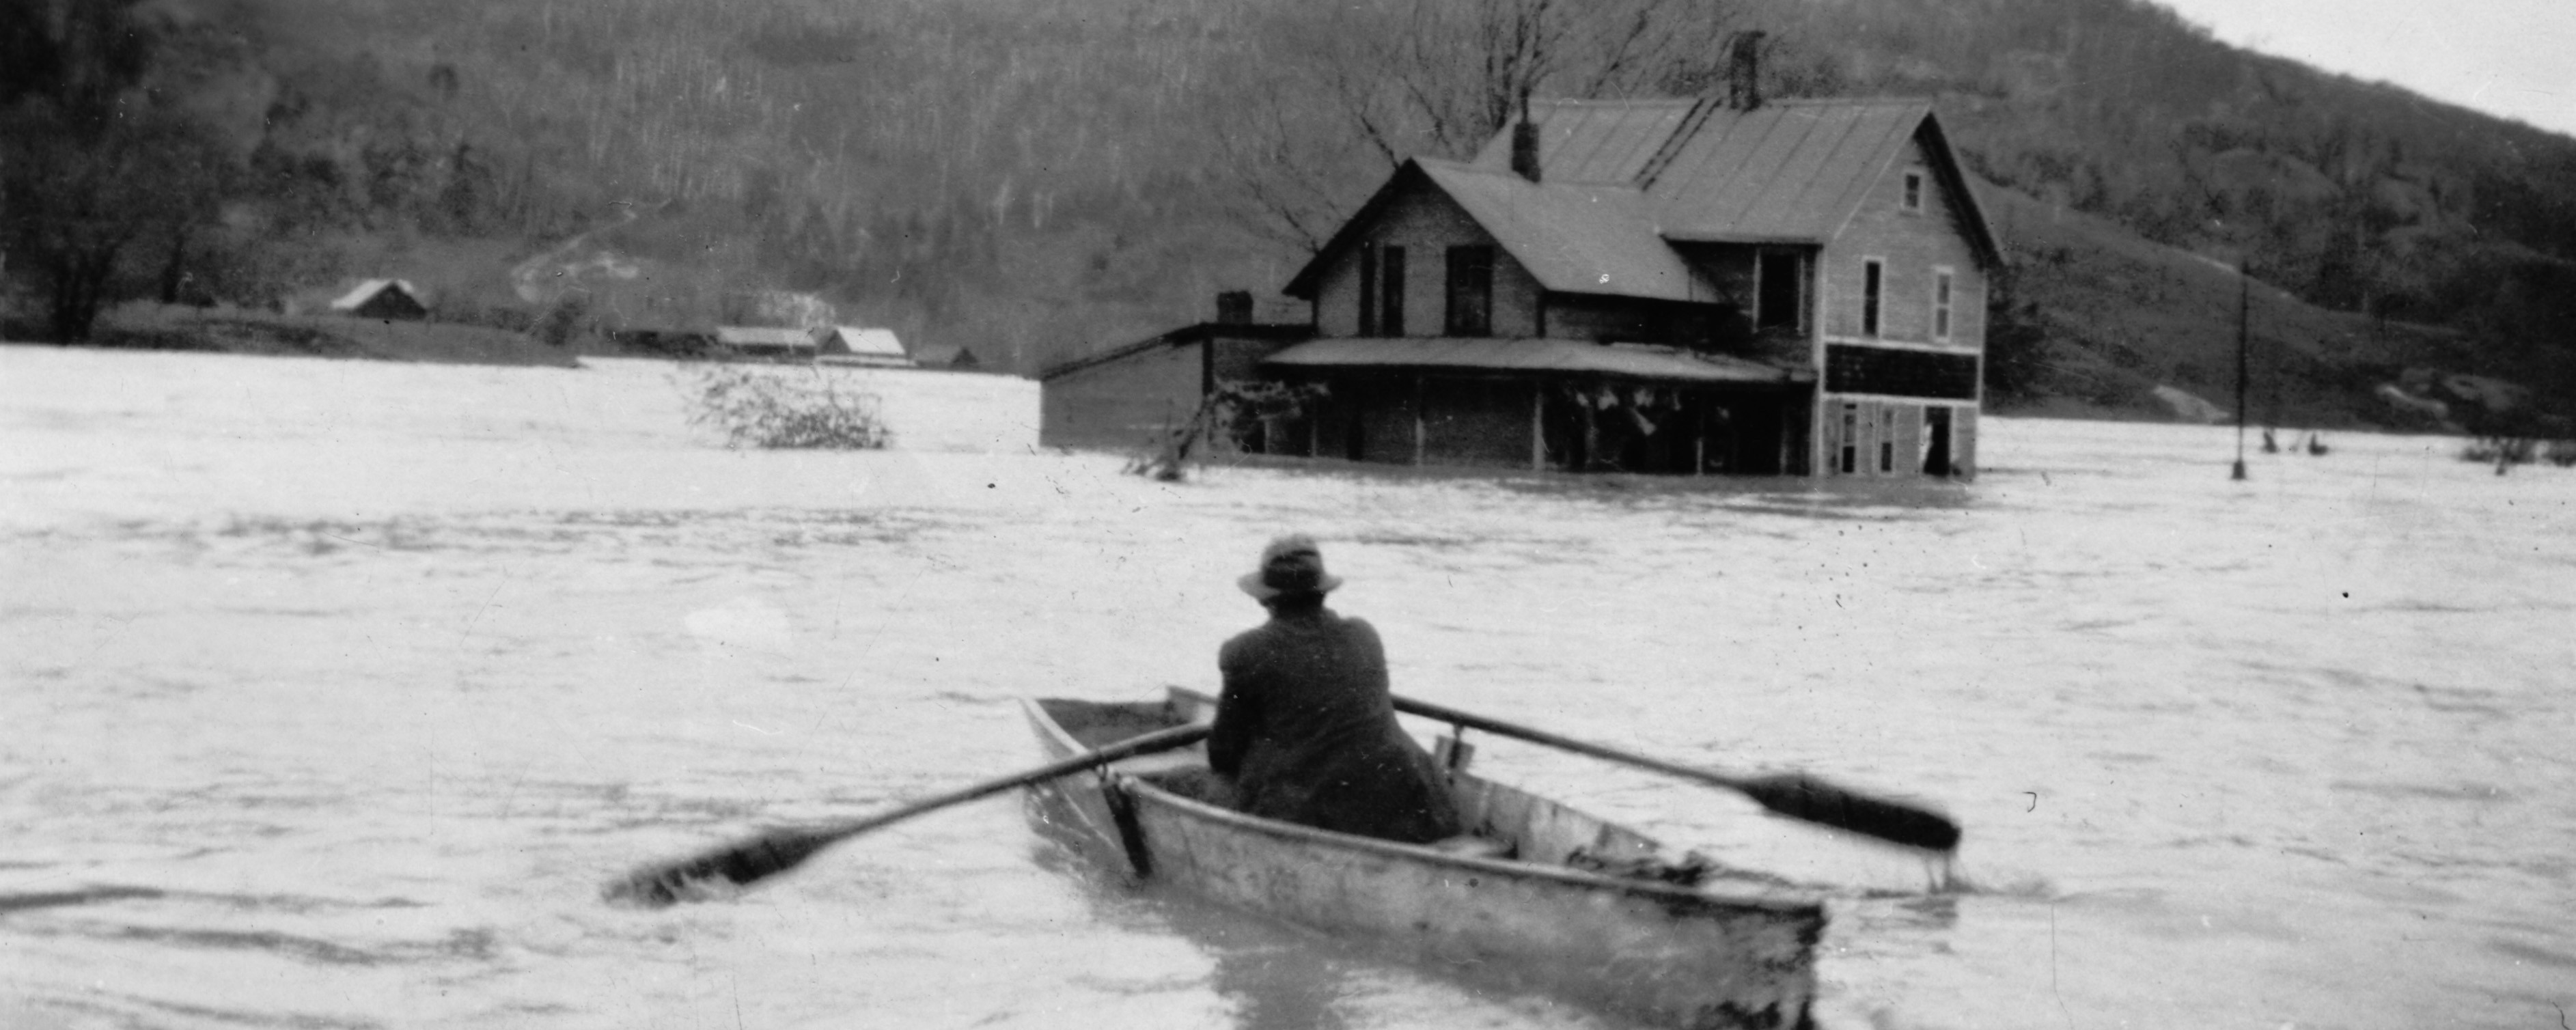 man in row boat by flooded house